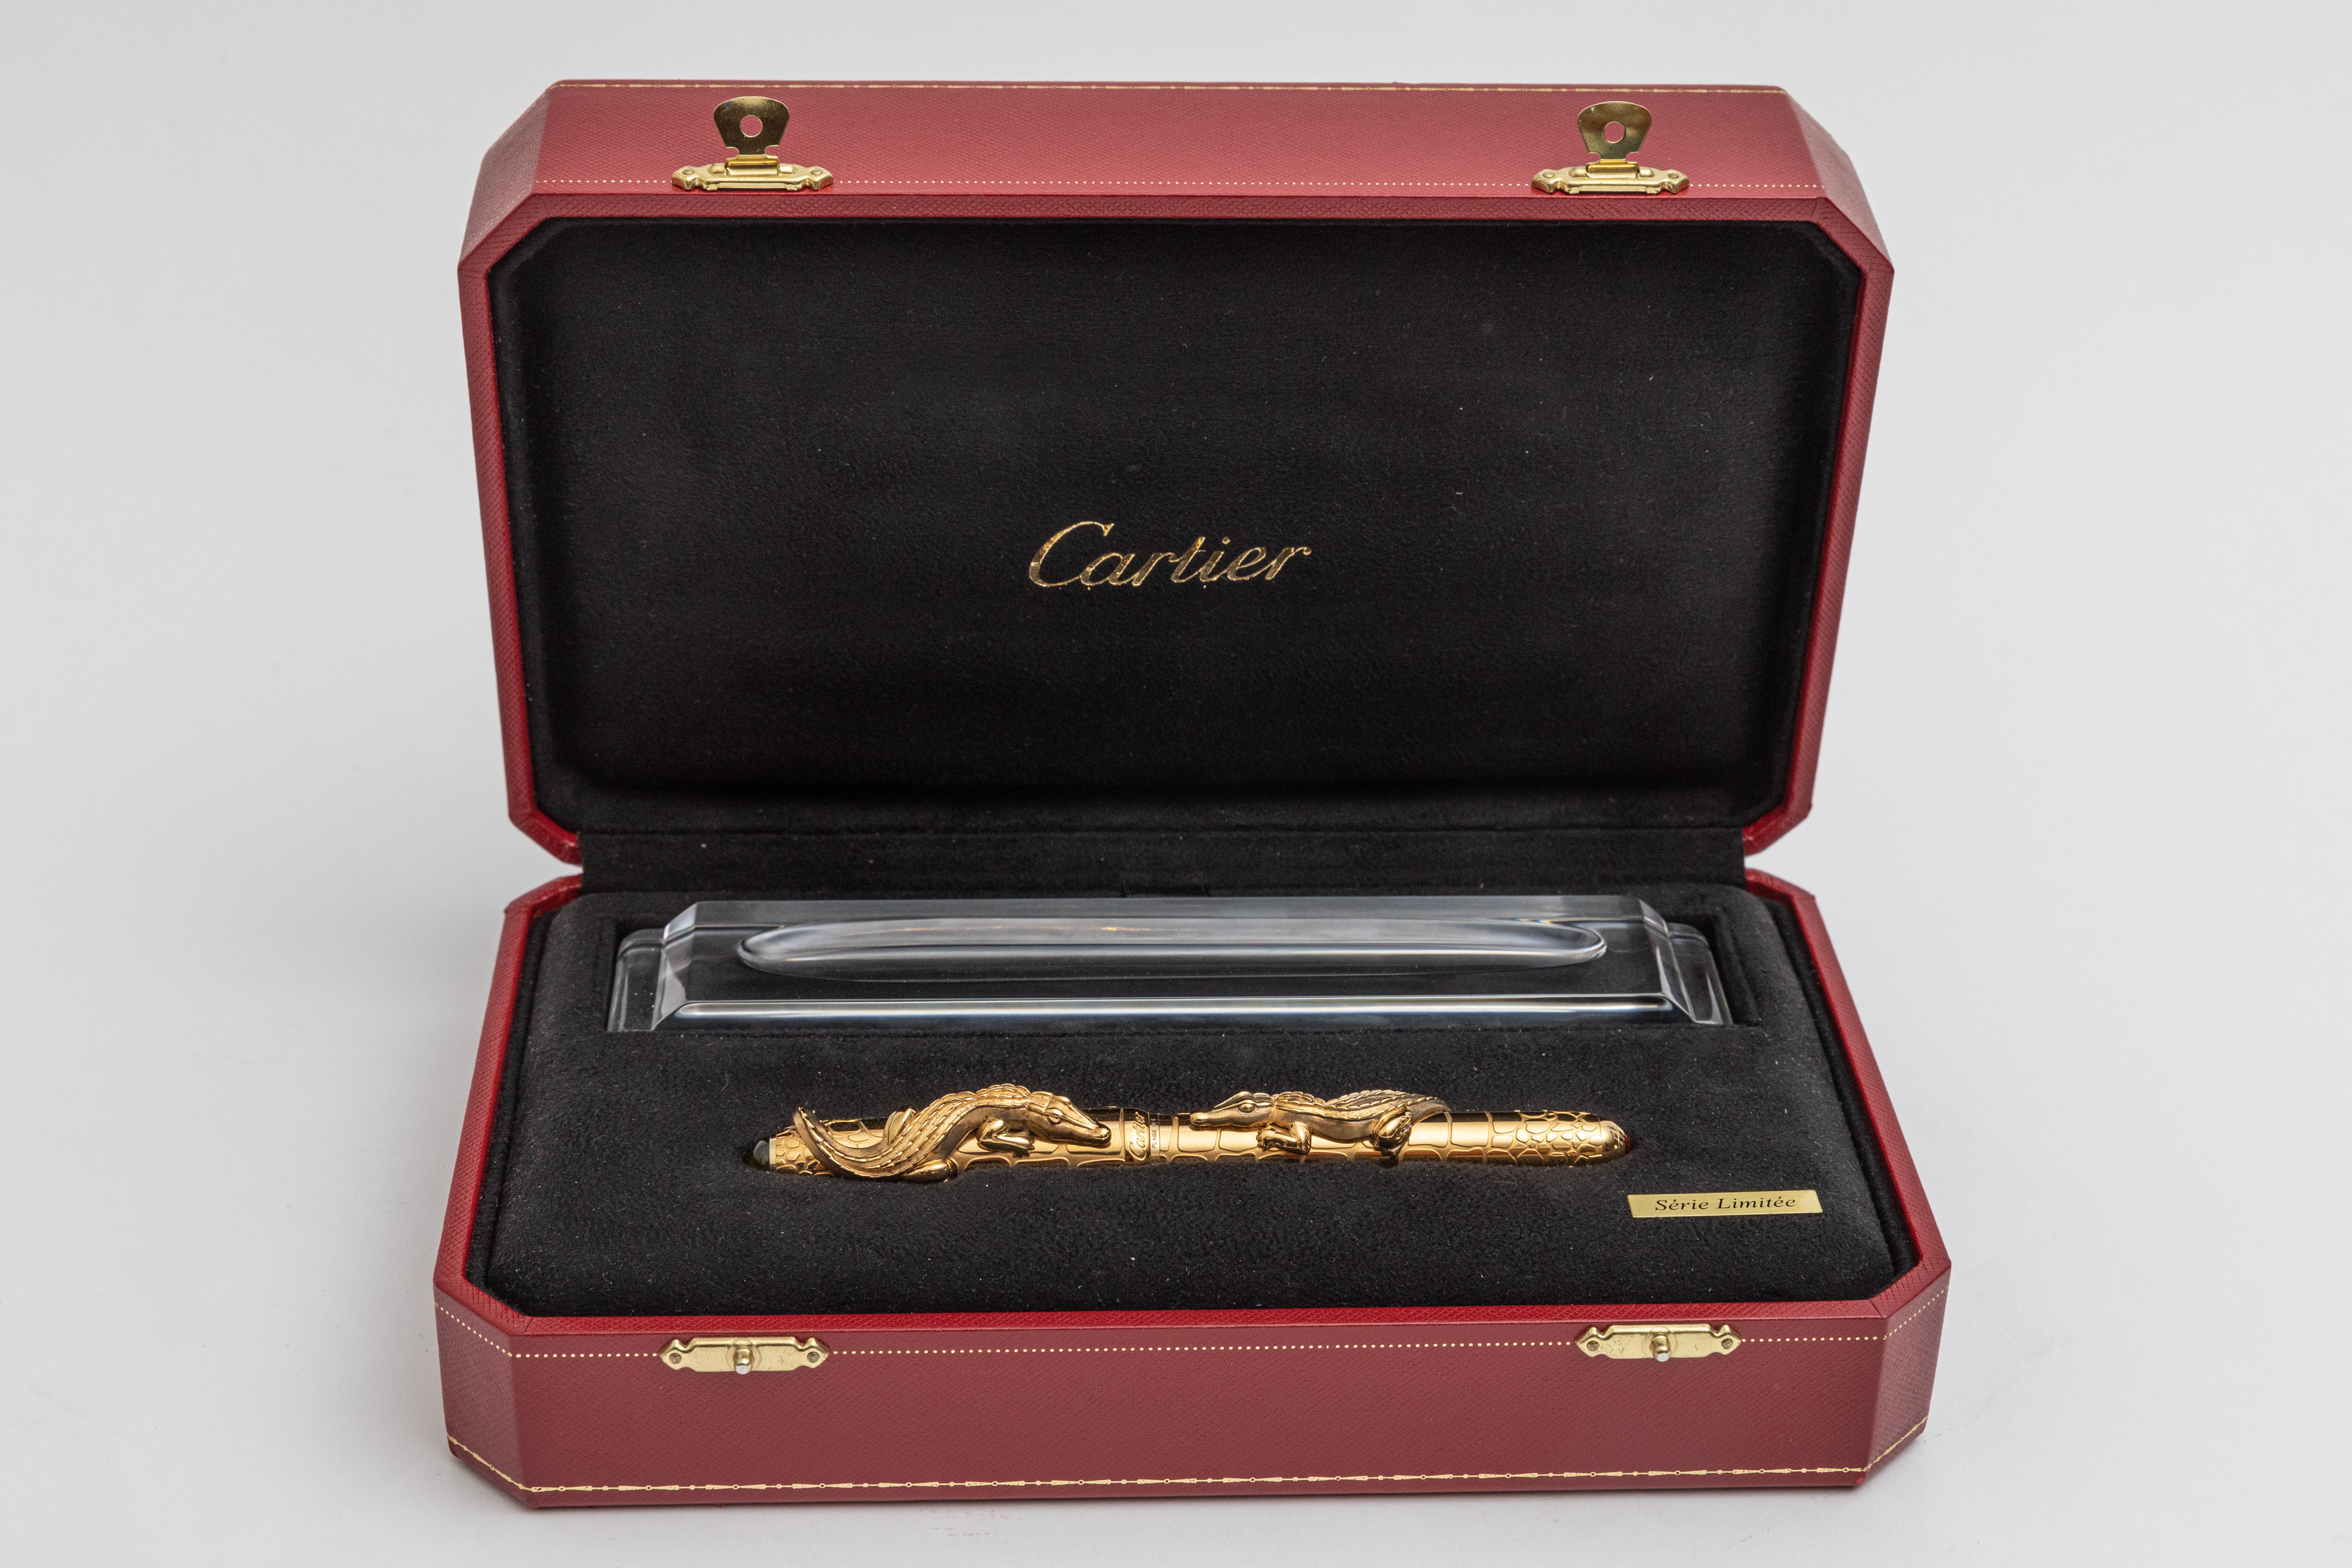 New in box and in mint condition. Originally priced $15,000 Limited Edition ( 1 of 888 worldwide) Cartier Crocodile De Cartier Exceptional Gold Fountain Pen.

Cartier's Limited edition pen represents on of the best pens ever produced.  Engraved gold